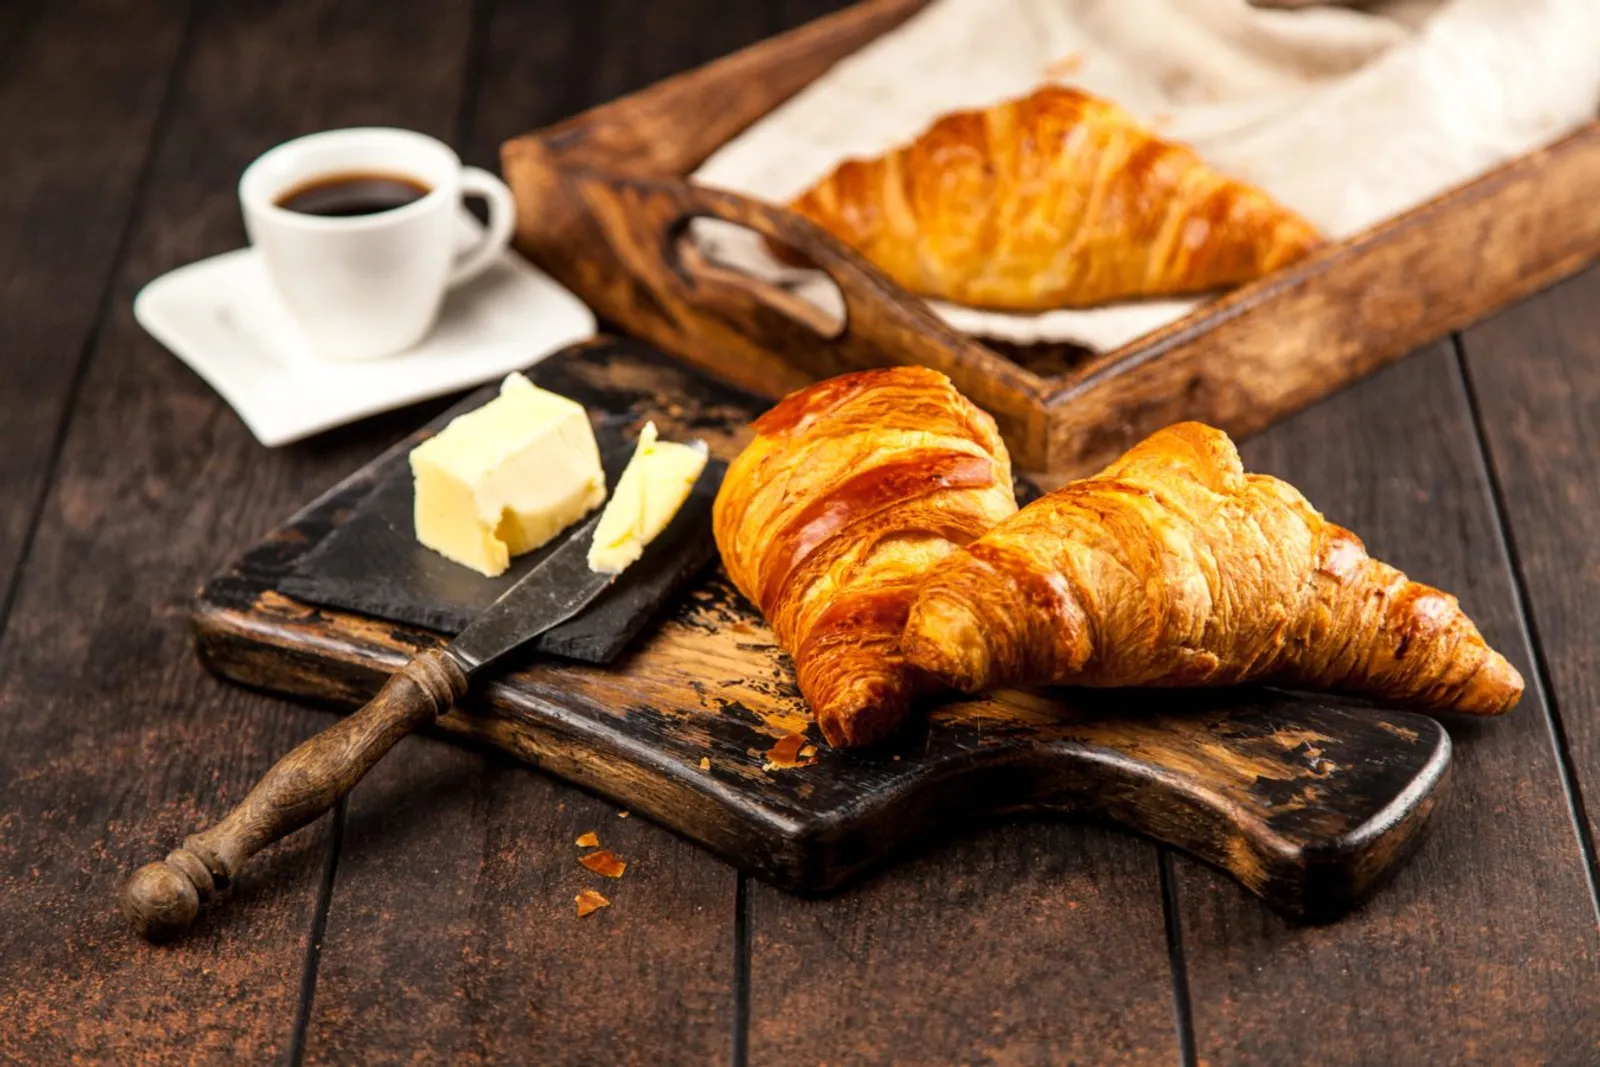 COFFEE AND CROISSANTS